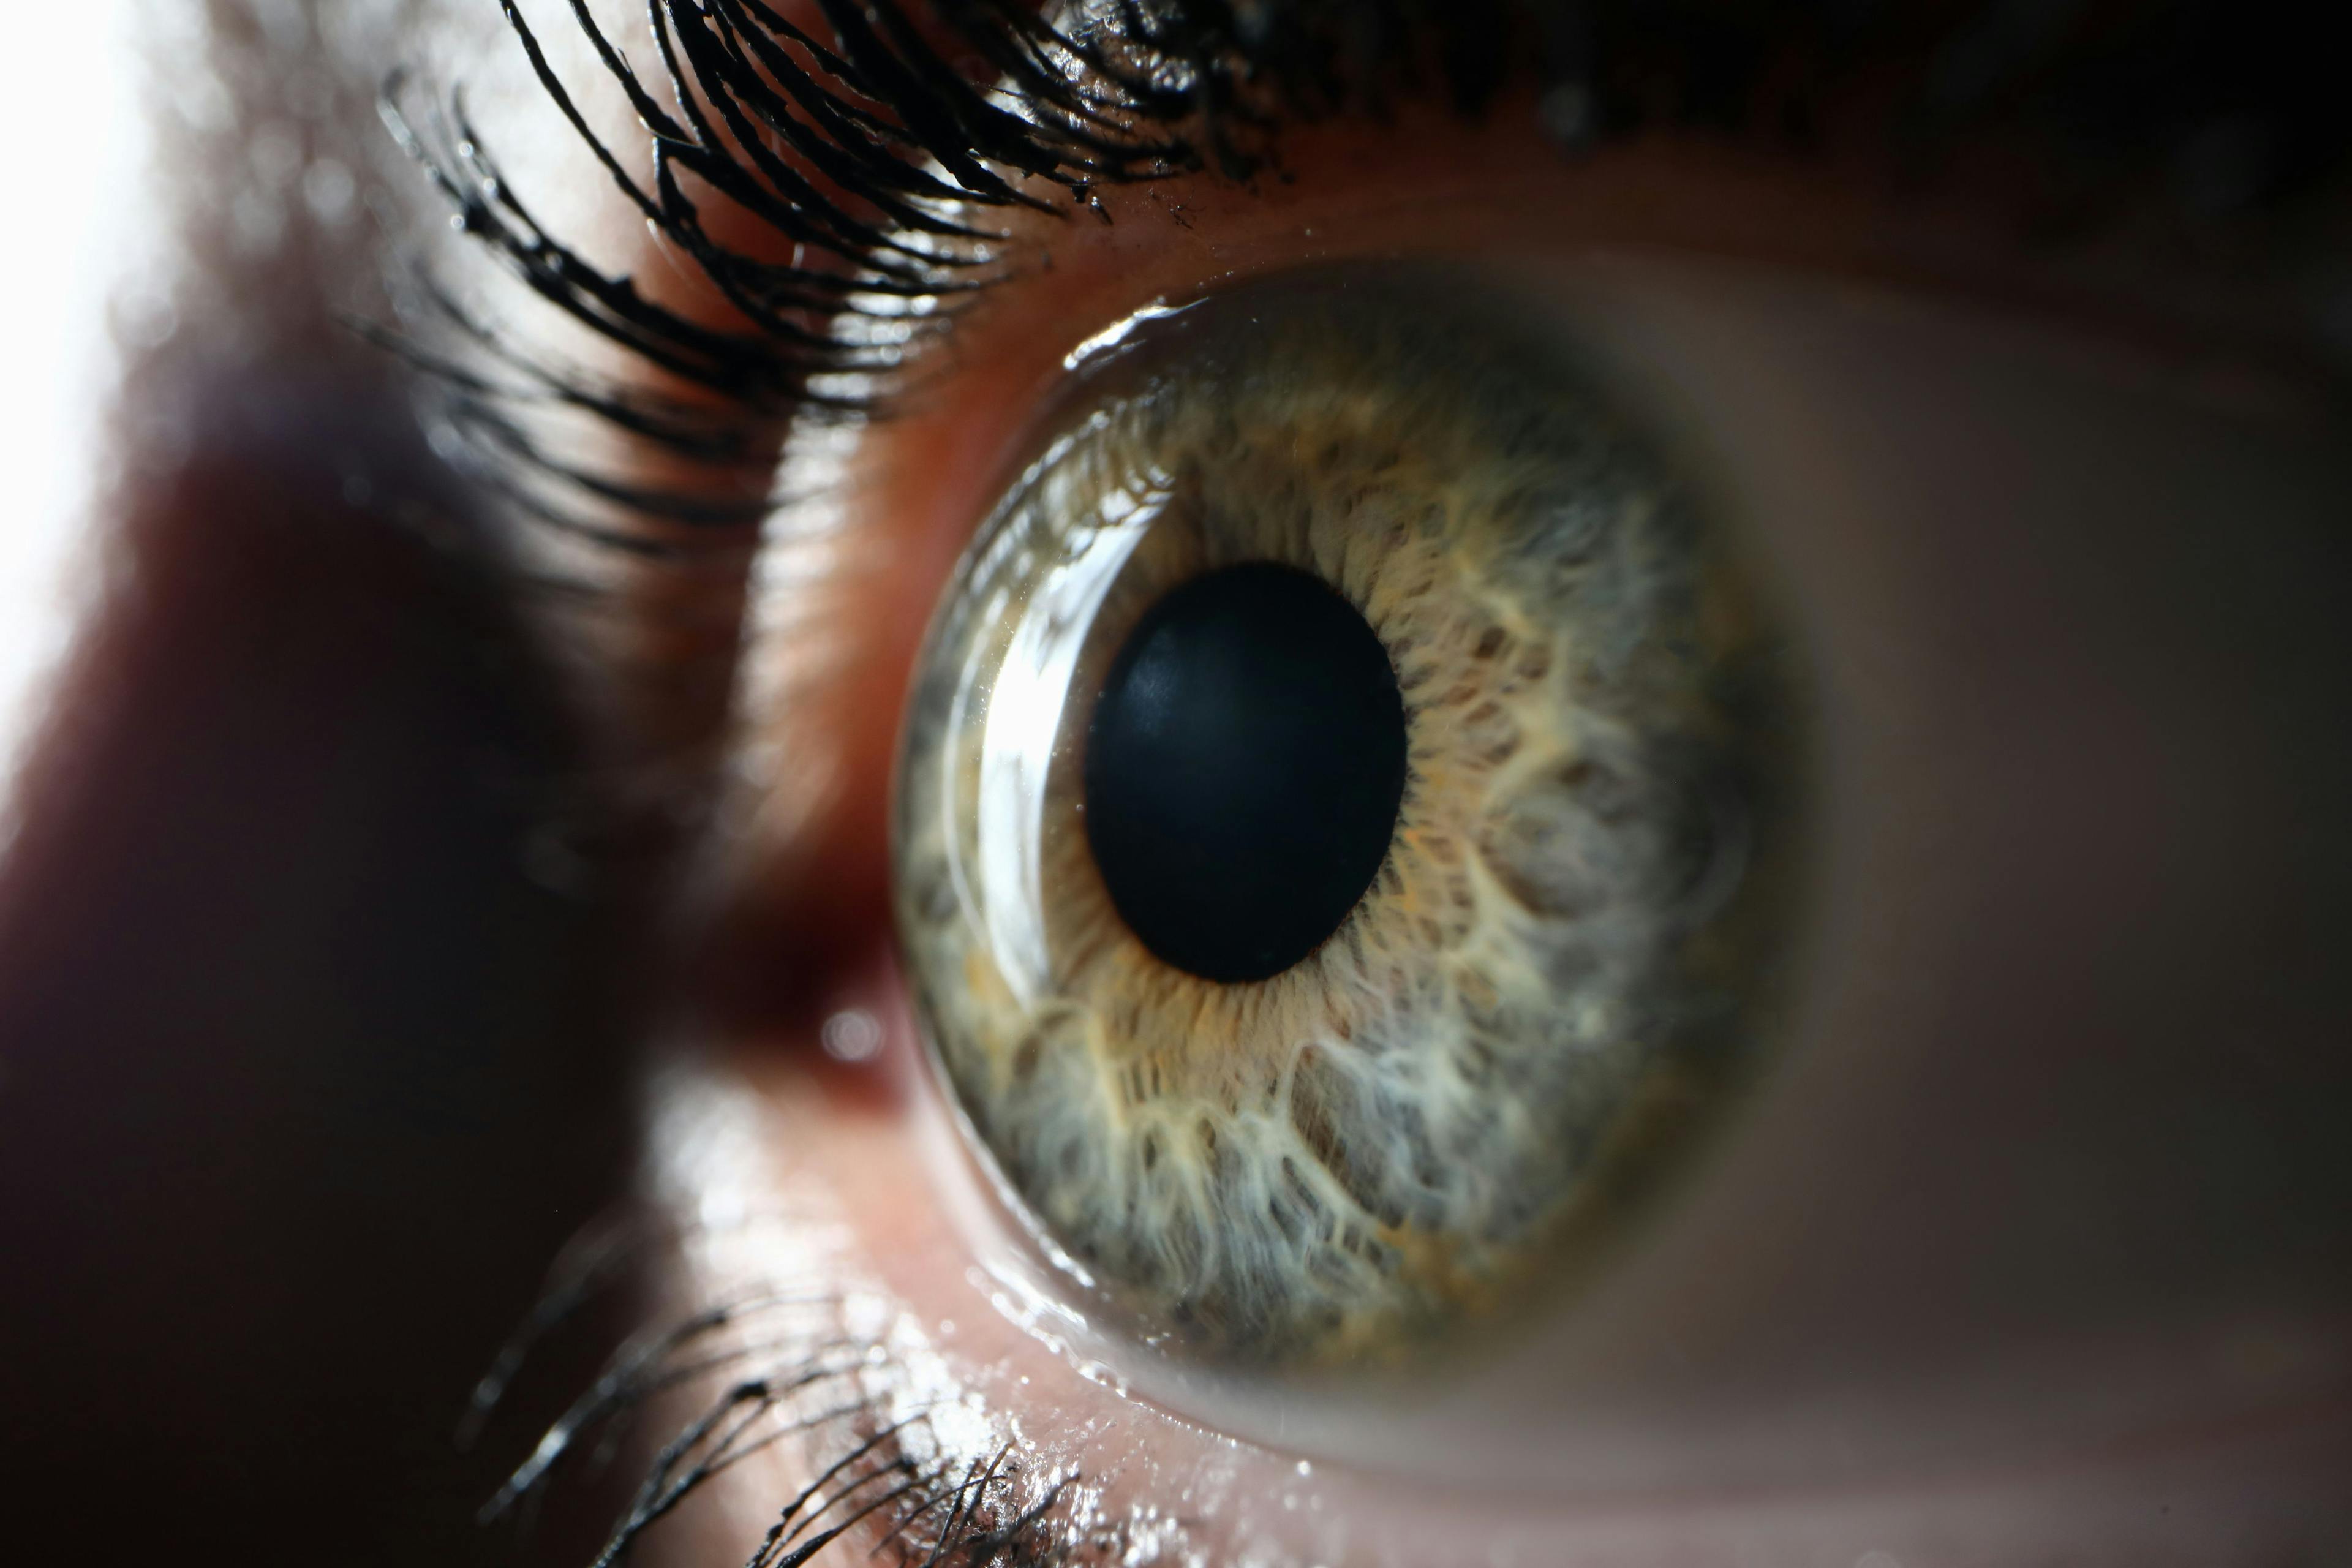 Glaukos offers its first-generation corneal cross-linking therapy, Photrexa, (Epi-off), currently the only FDA-approved treatment shown to slow and halt the progression of keratoconus.